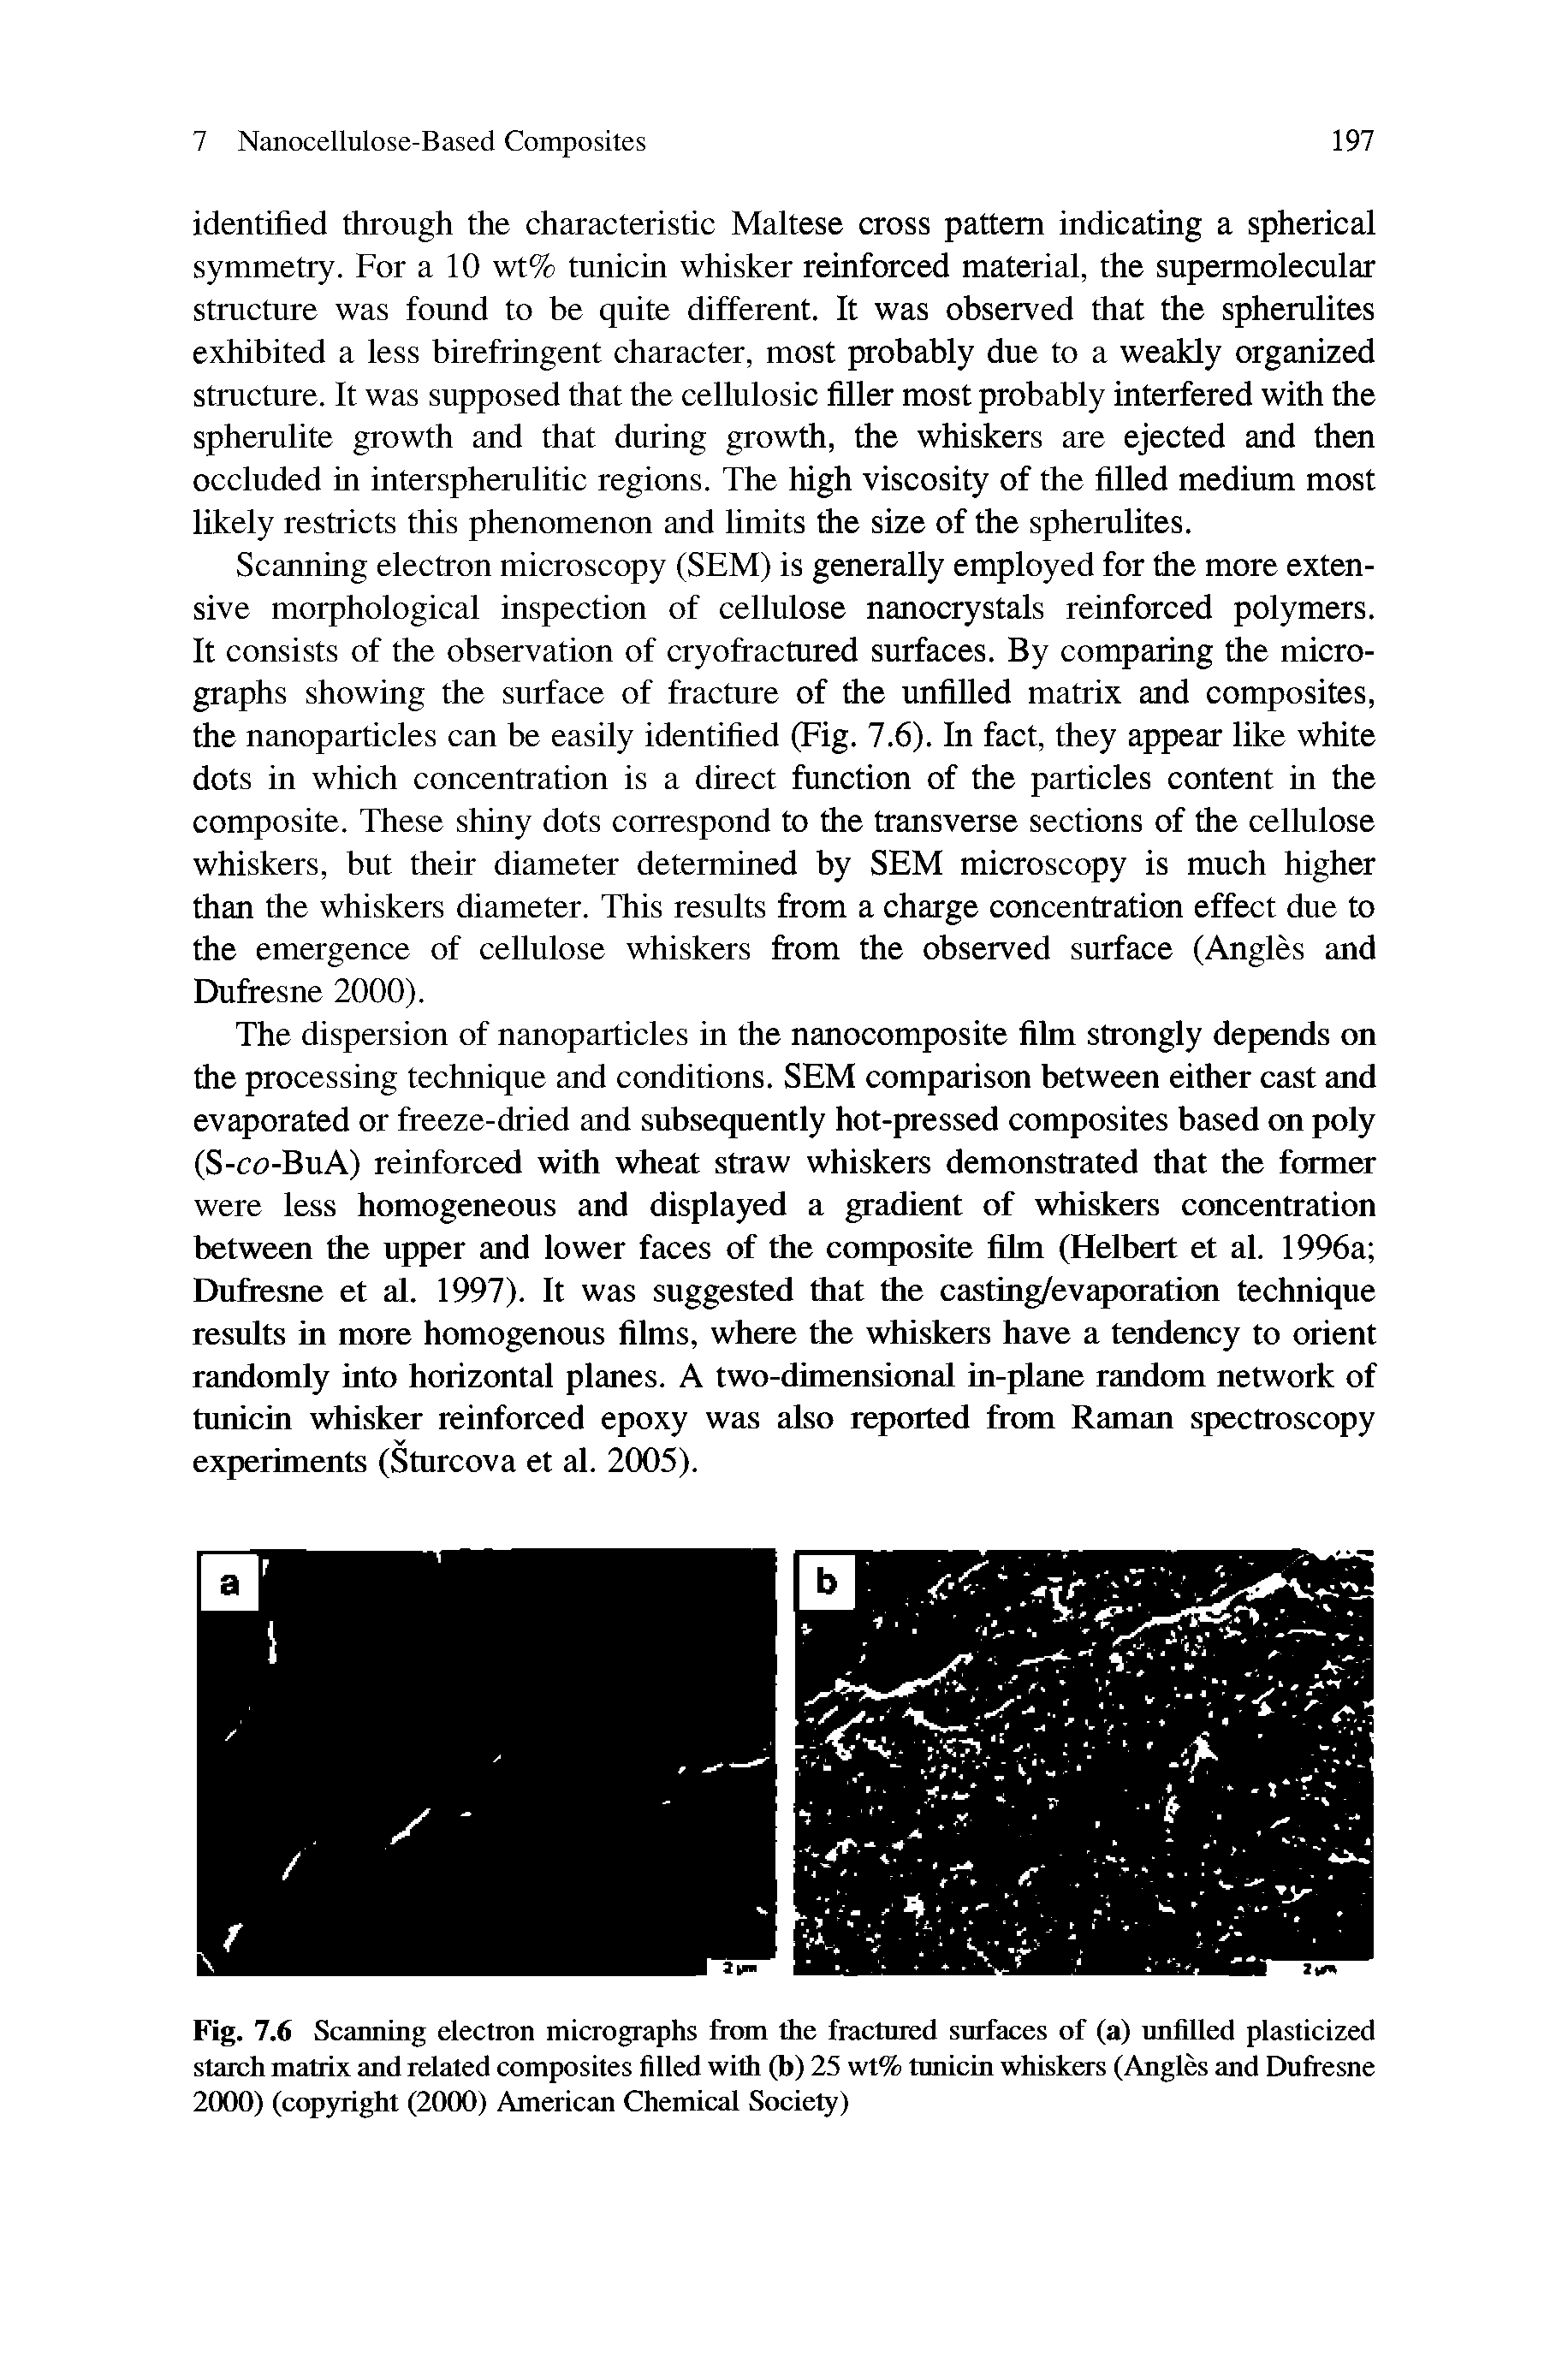 Fig. 7.6 Scanning electron micrographs from the fractured surfaces of (a) unfilled plasticized starch matrix and related composites filled with (b) 25 wt% tunicin whiskers (Angles and Dufresne 2000) (copyright (2000) American Chemical Society)...